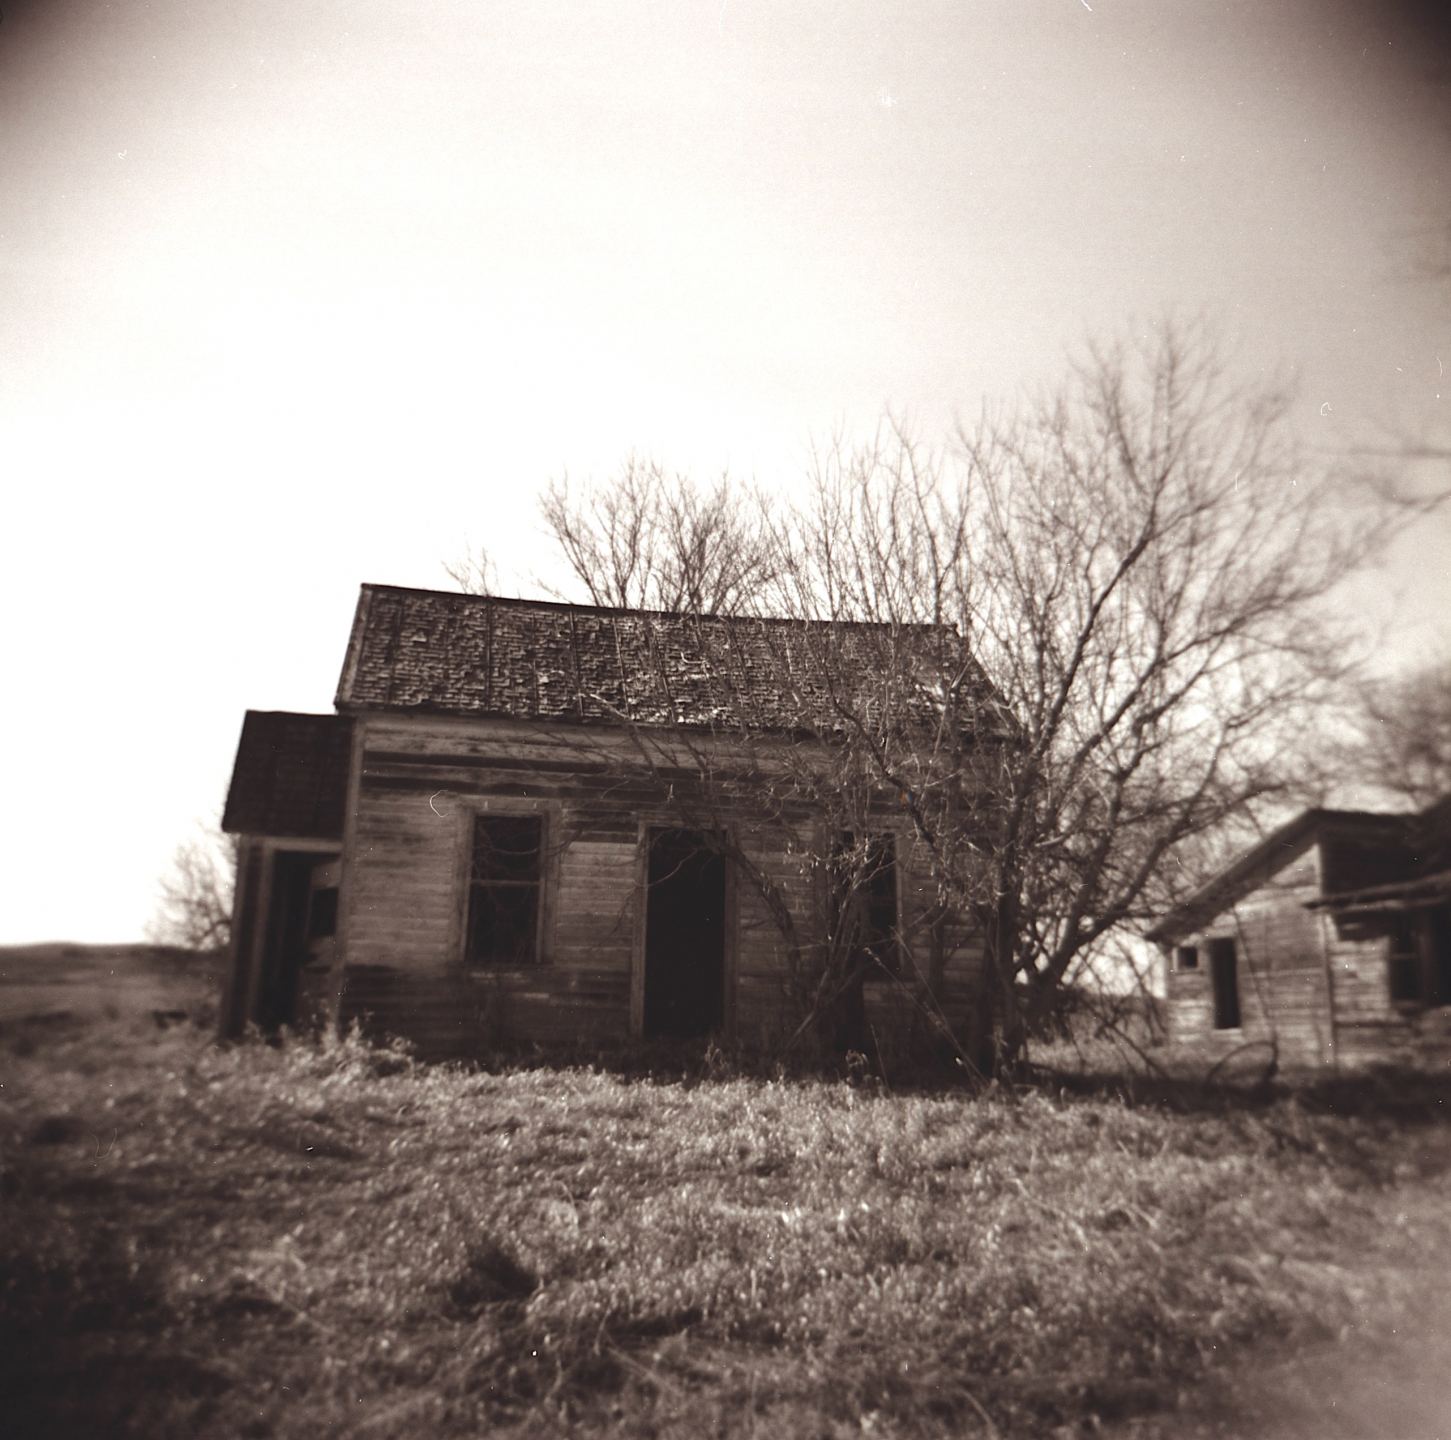 black and white photo of an old wooden farmhouse and surrounding buildings